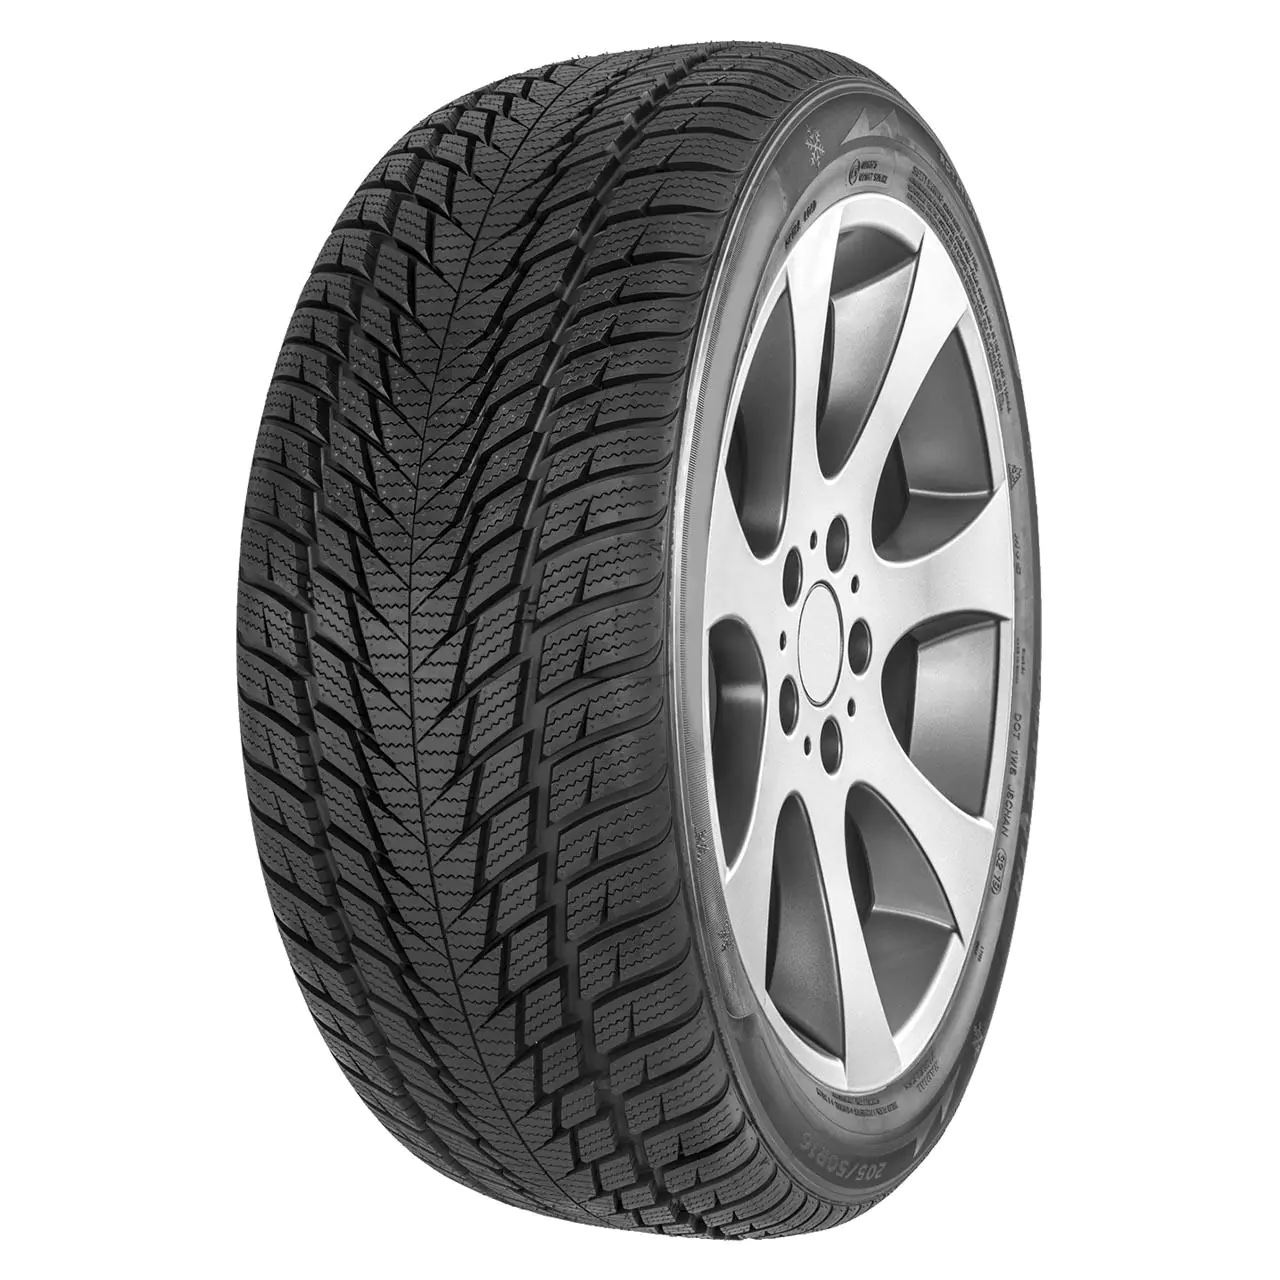 Gomme Autovettura Fortuna 225/45 R19 96V GOWIN UHP3 XL M+S Invernale